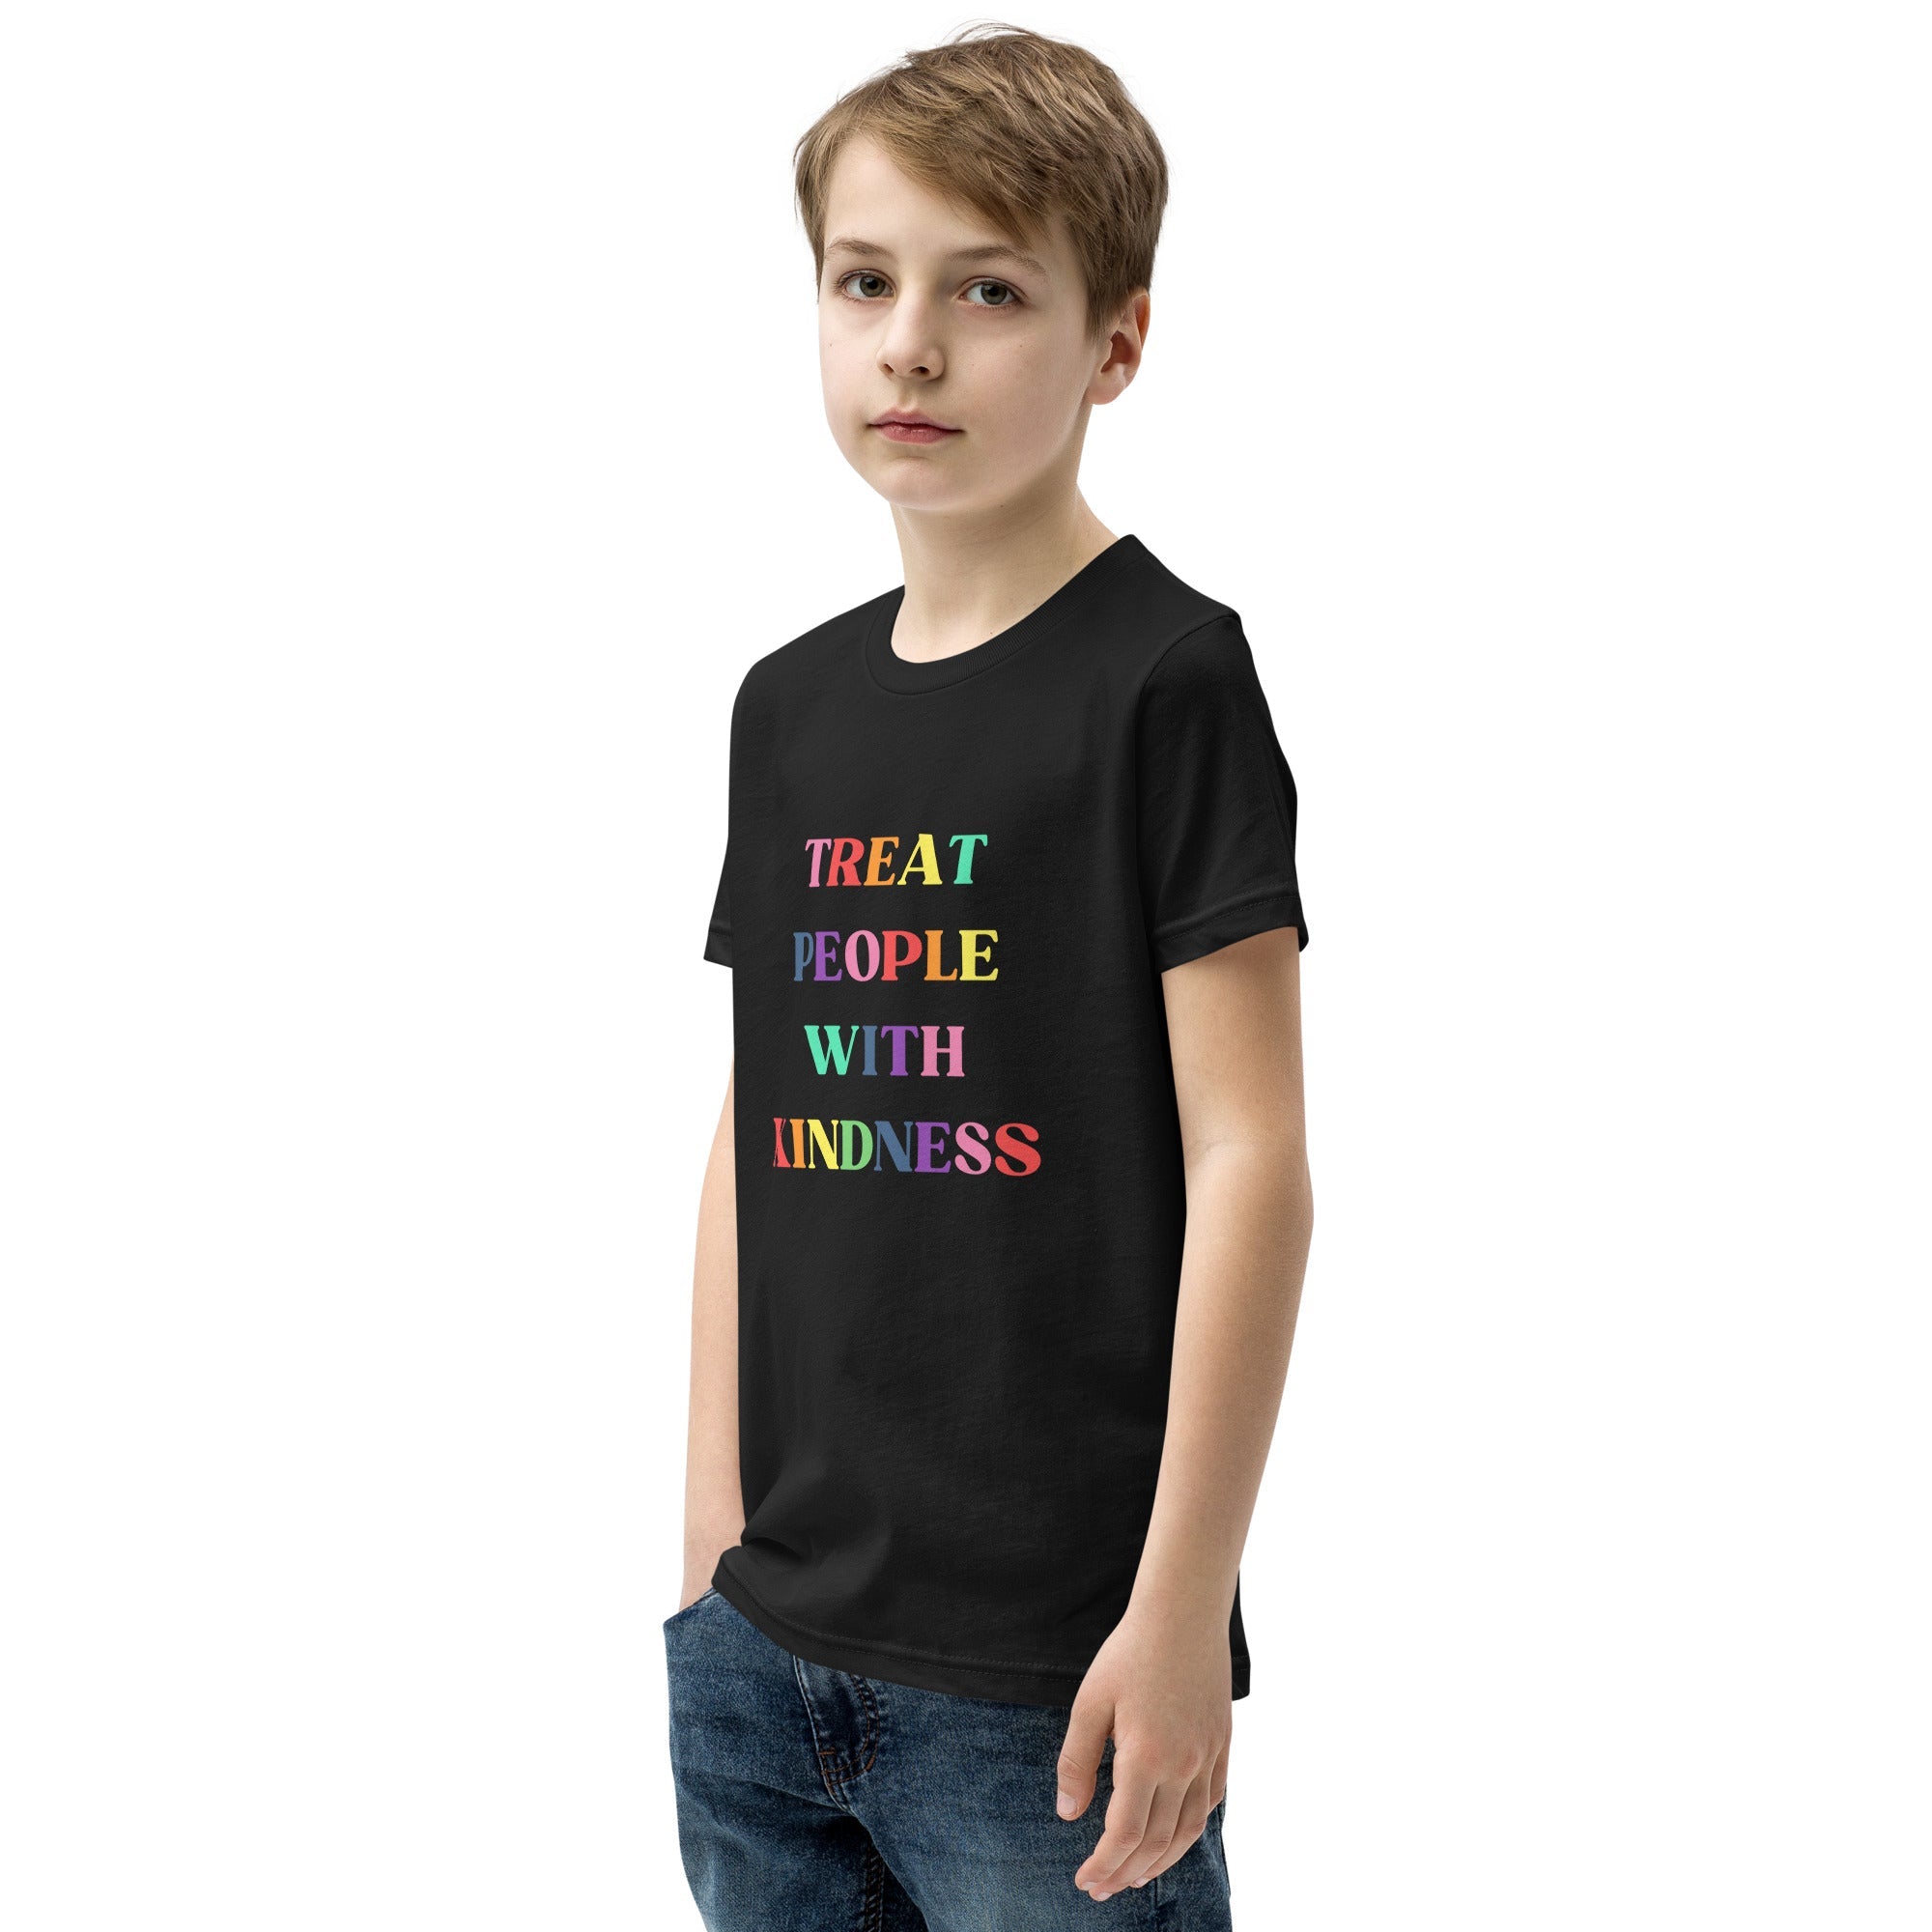 Treat People with Kindness Printed Youth Short Sleeve T-Shirt - The Kindness Cause